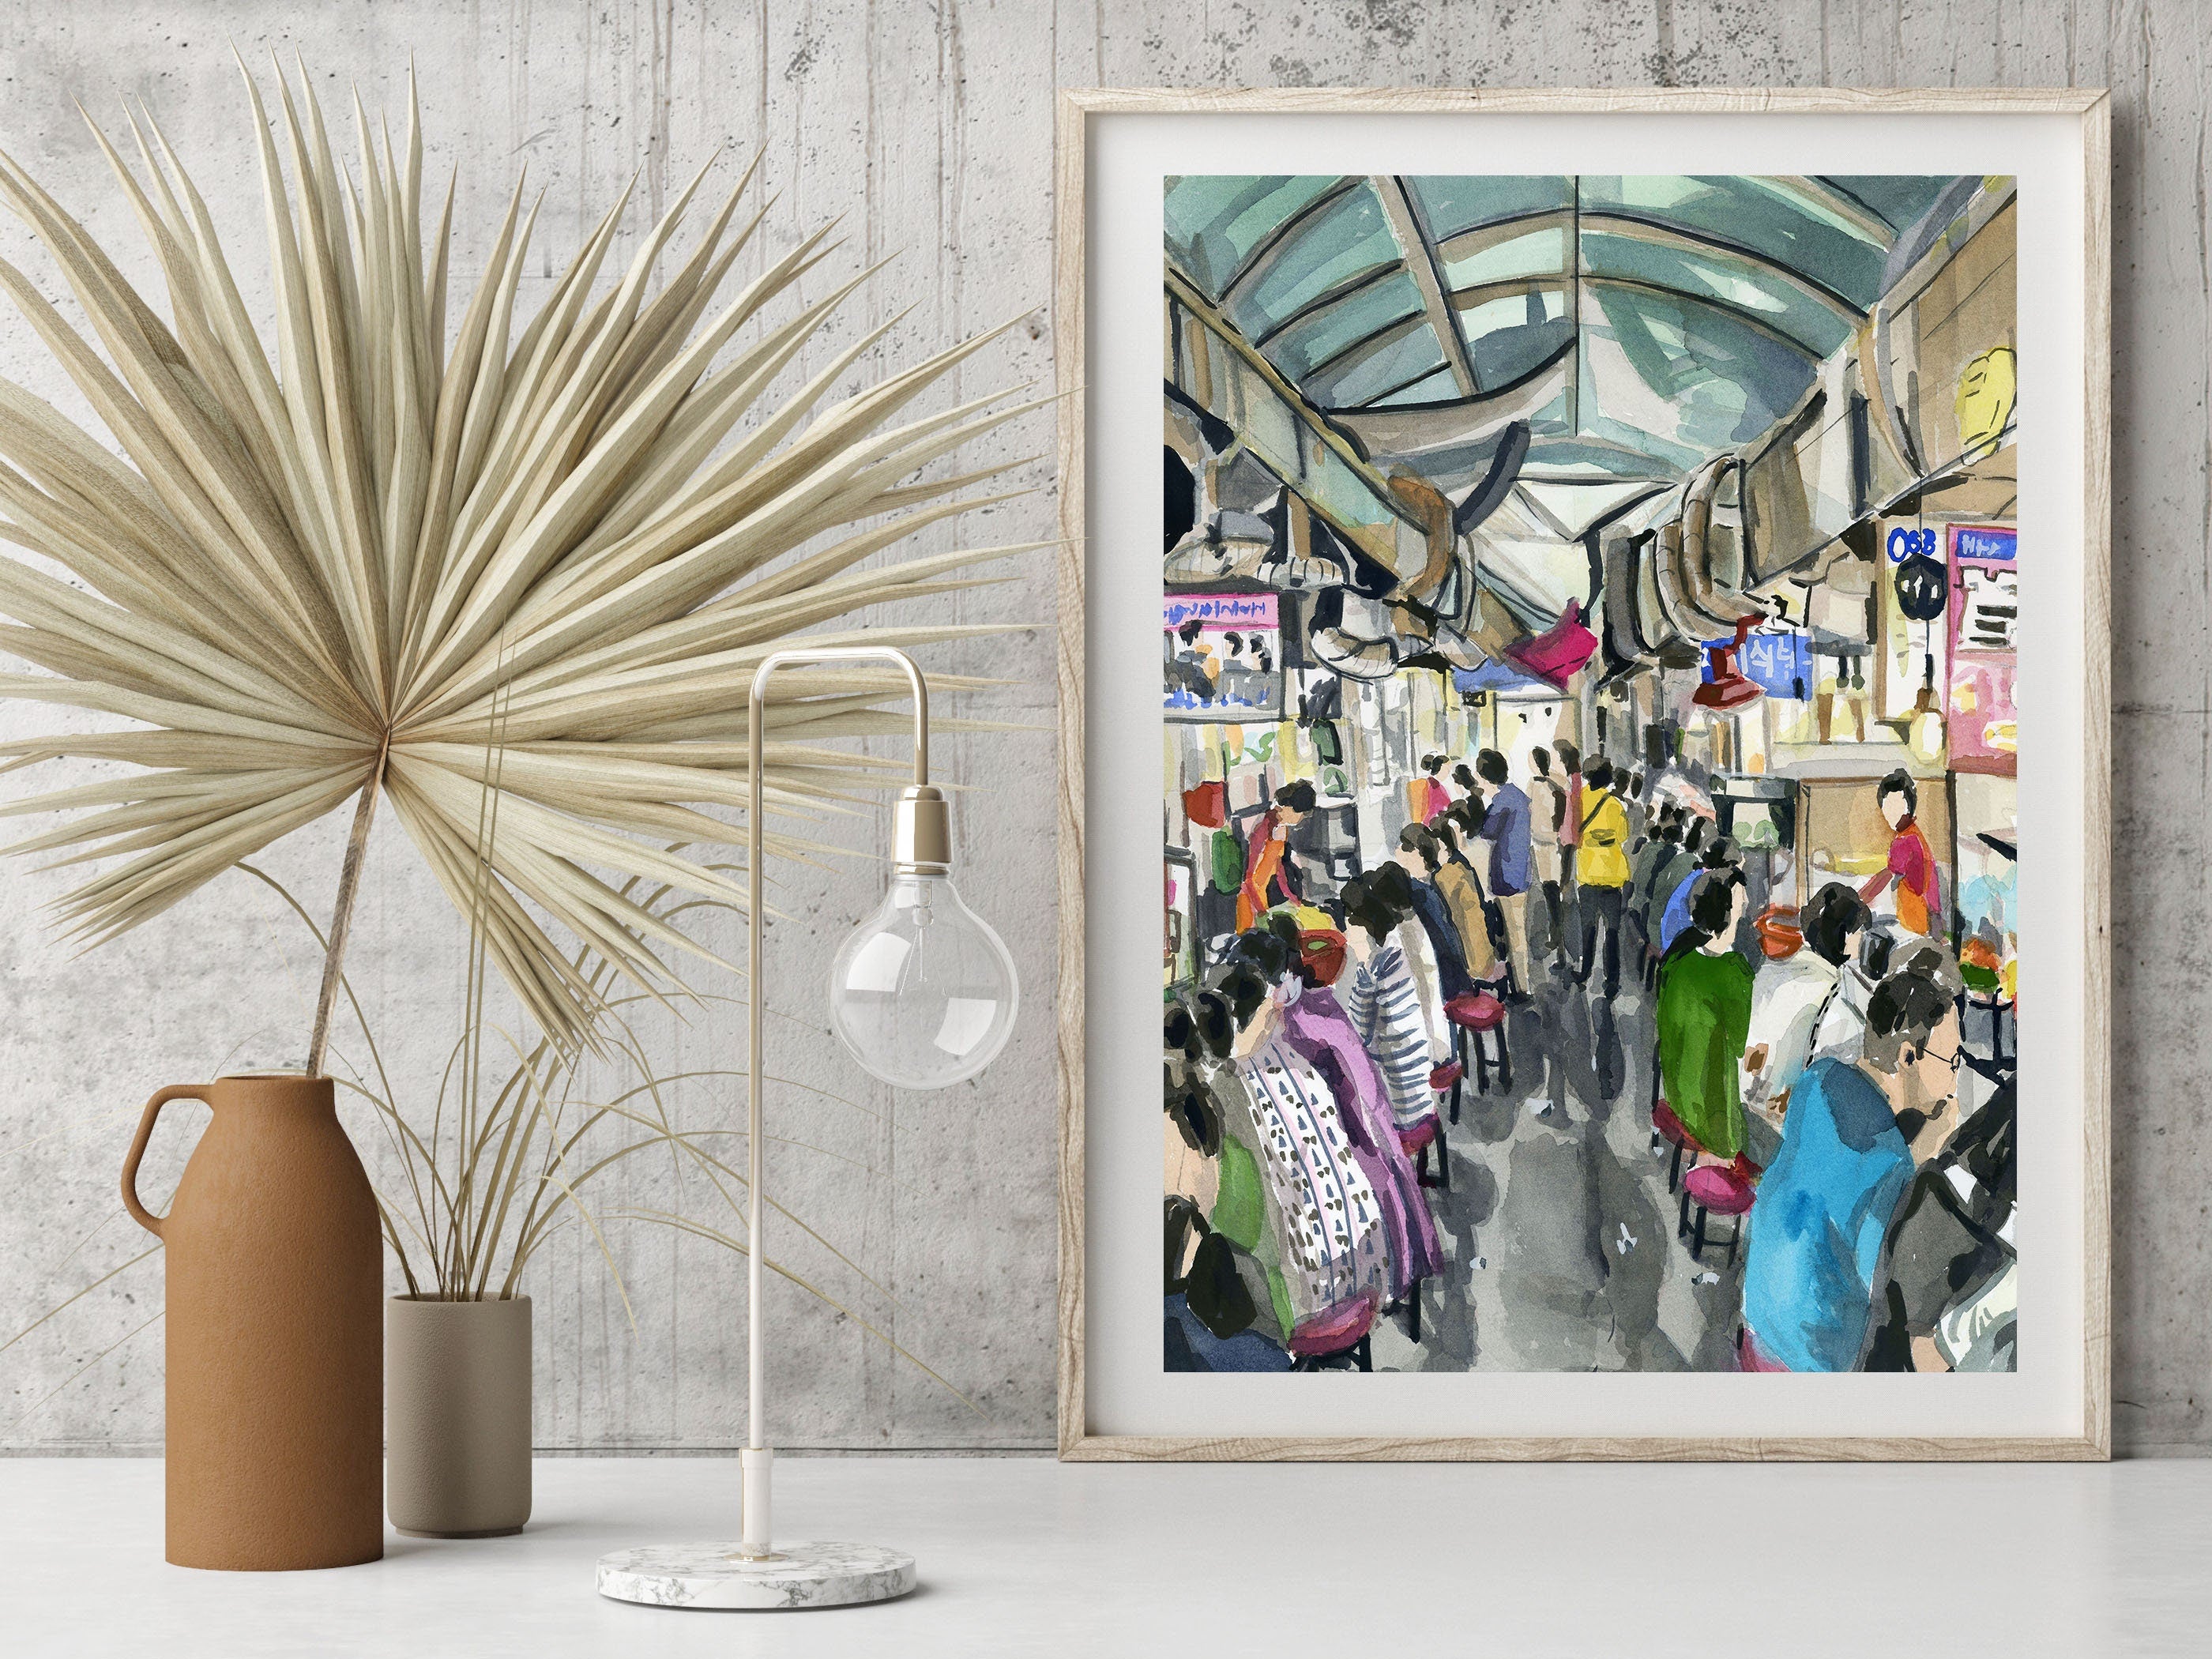 Korean street market alley print of painting by Medjool Studio. Print of original gouache painting featuring a scene from a Korean market in Busan, South Korea. 